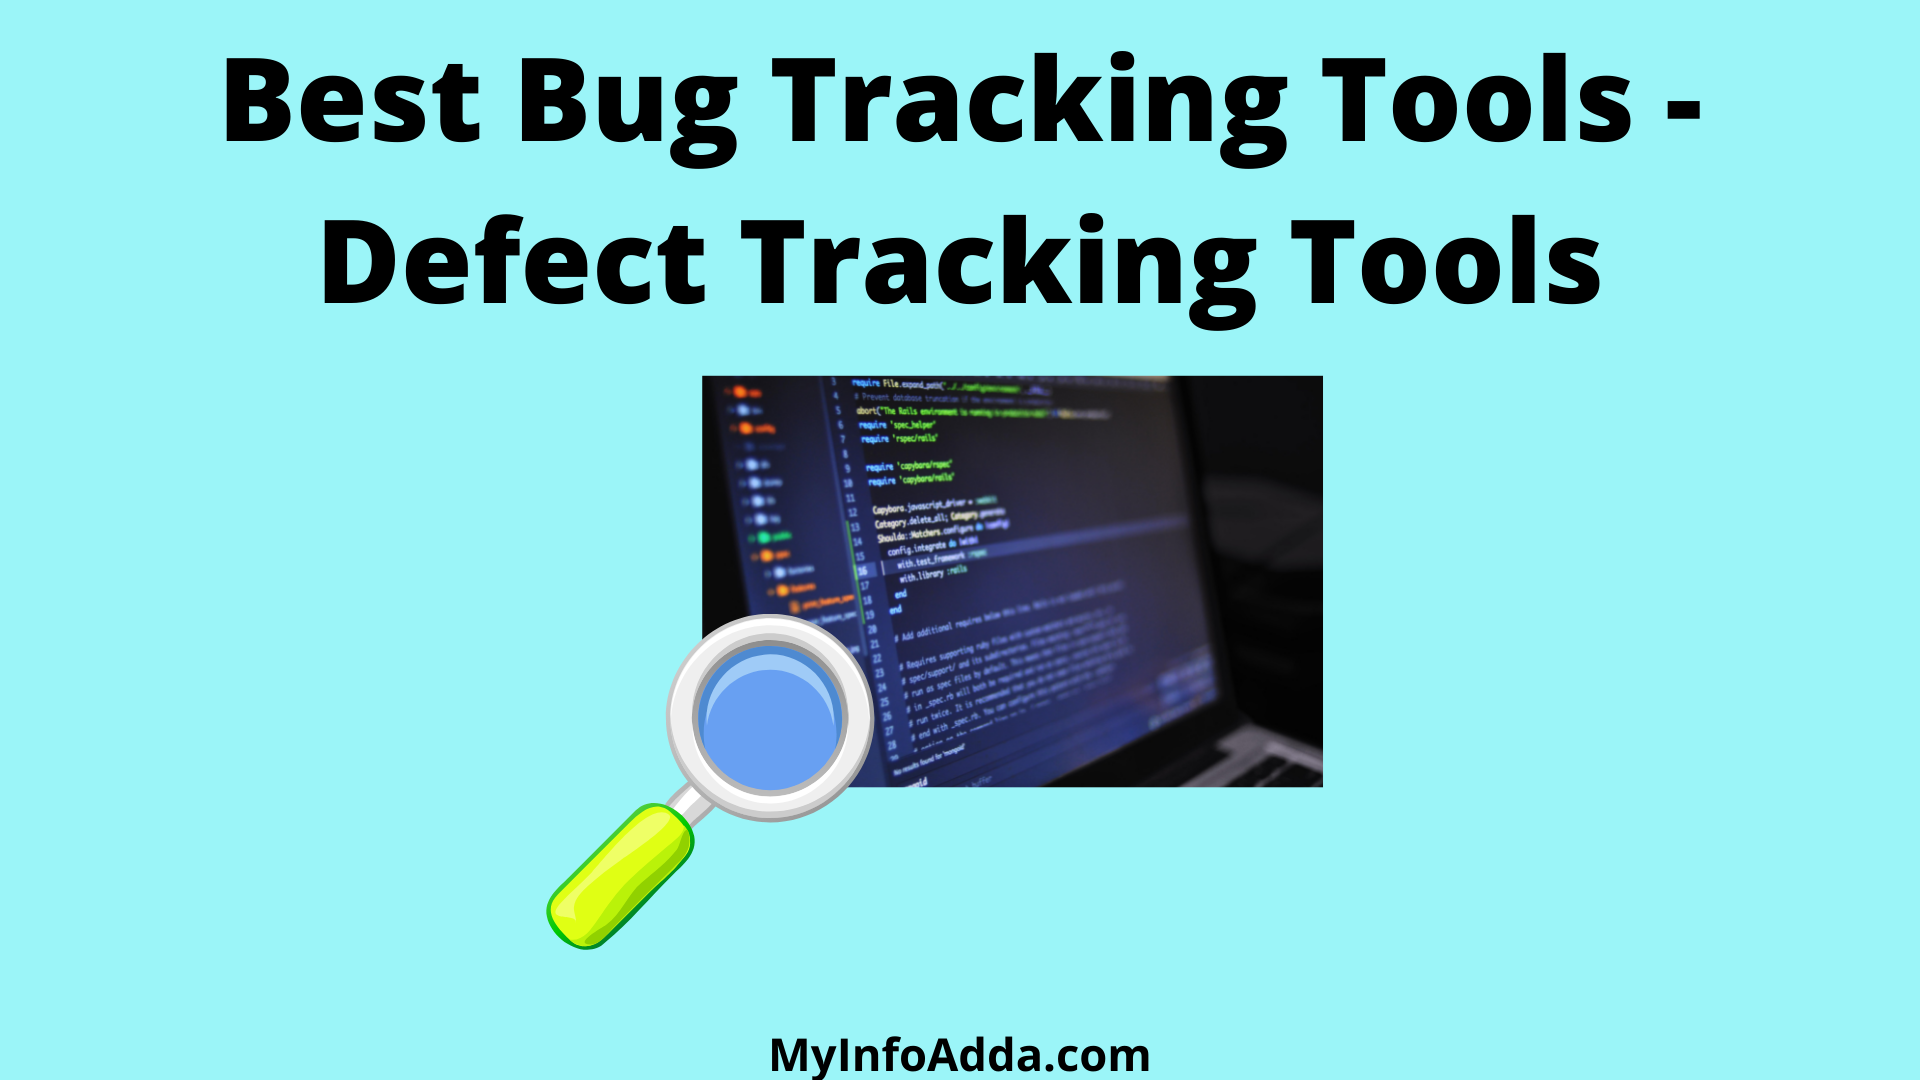 Best Bug Tracking Tools - Defect Tracking Tools